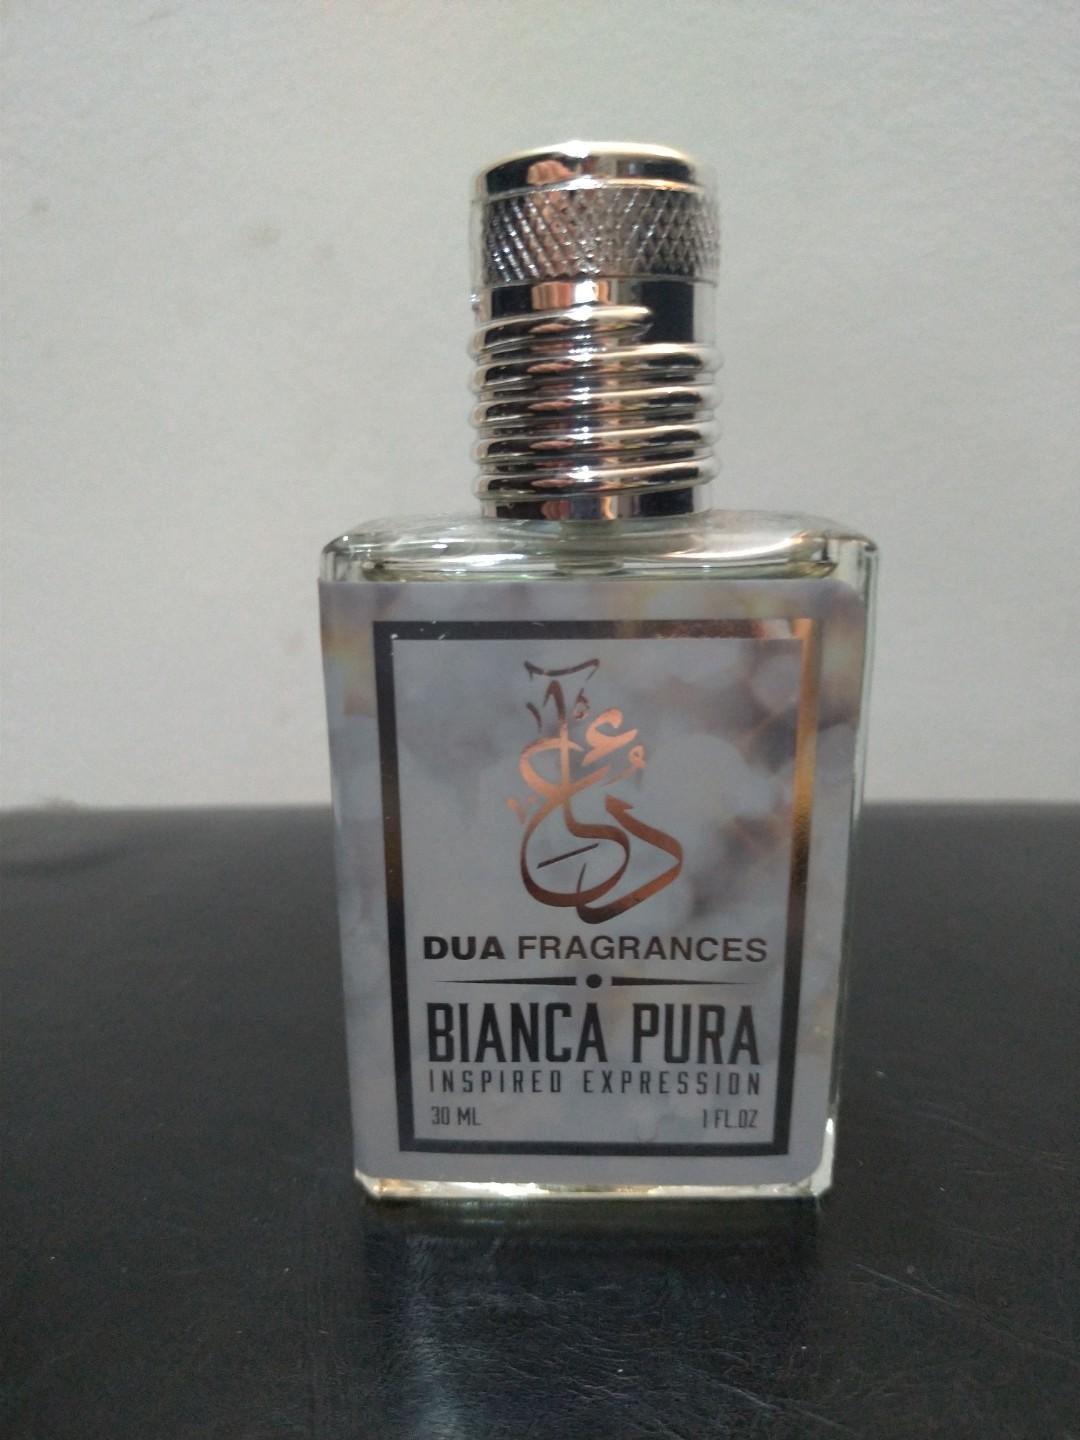 Bianca Pura - DUA FRAGRANCES - Inspired by Pure White Cologne